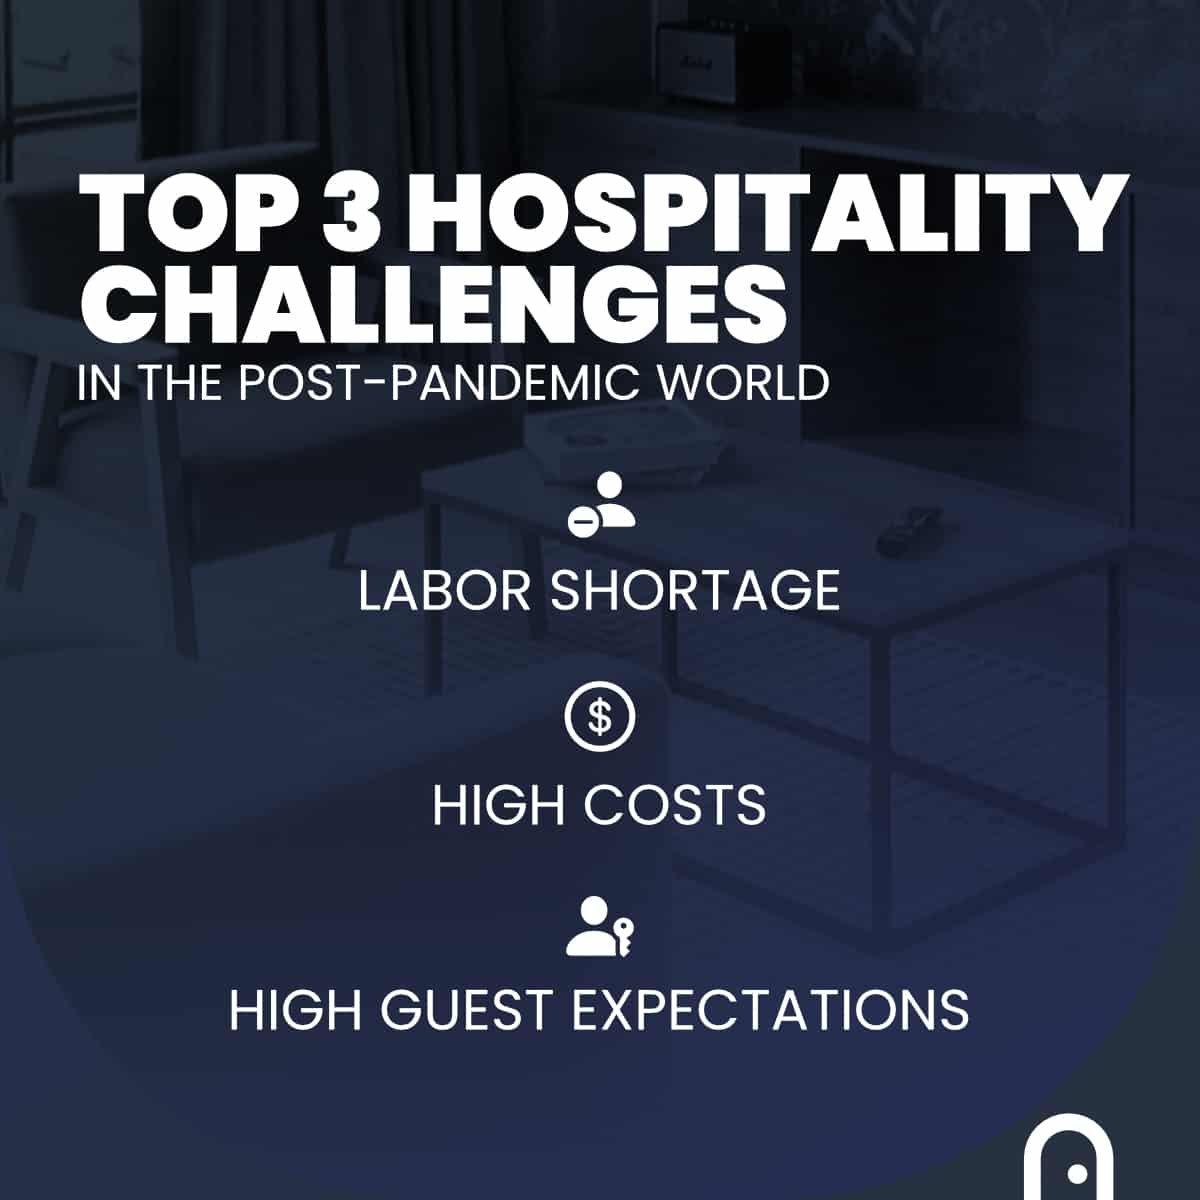 Top 3 hospitality challenges